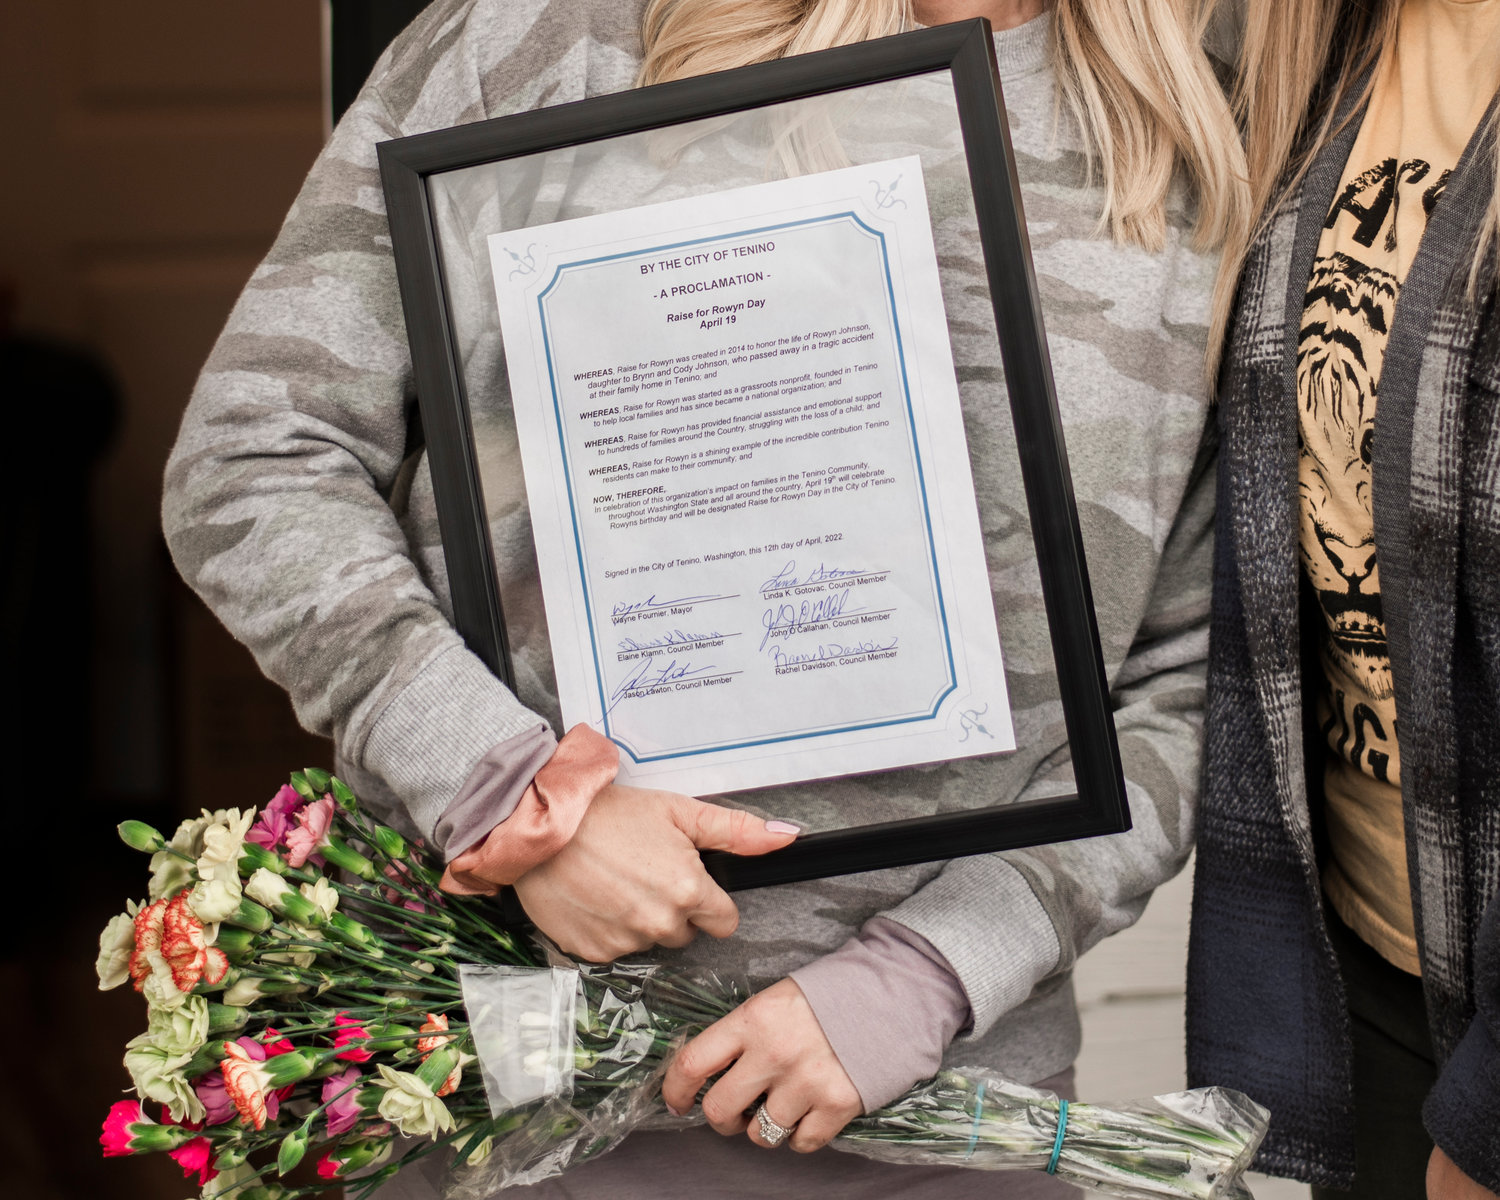 Brynn Johnson holds onto flowers and a proclamation by the City of Tenino Tuesday during an event honoring Raise for Rowyn Day in Tenino.